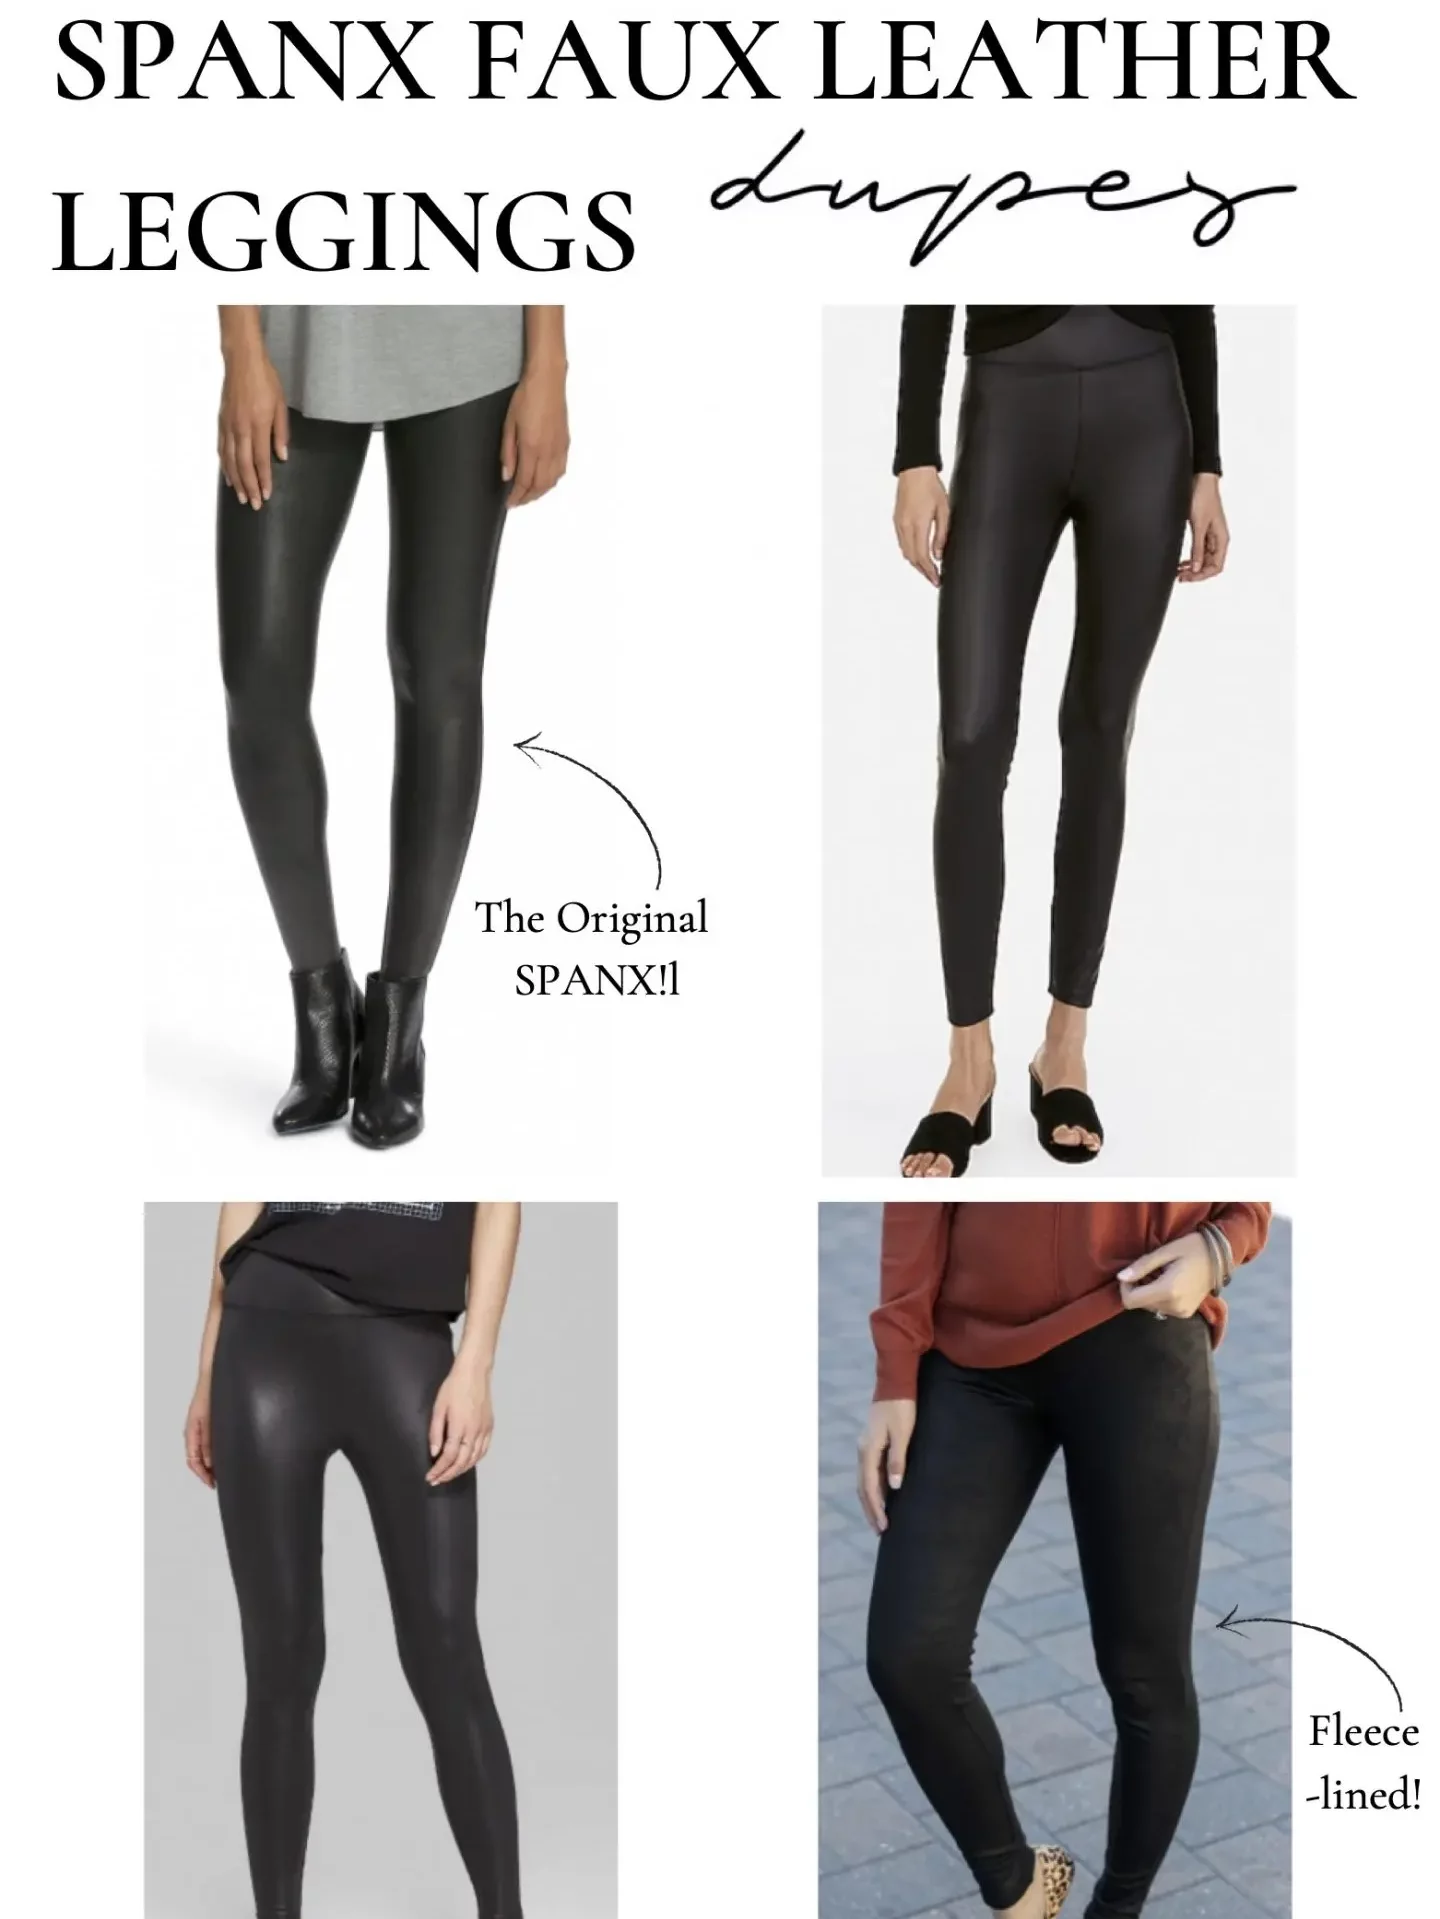 Eight Spanx Faux Leather Leggings Outfits - By Lauren M